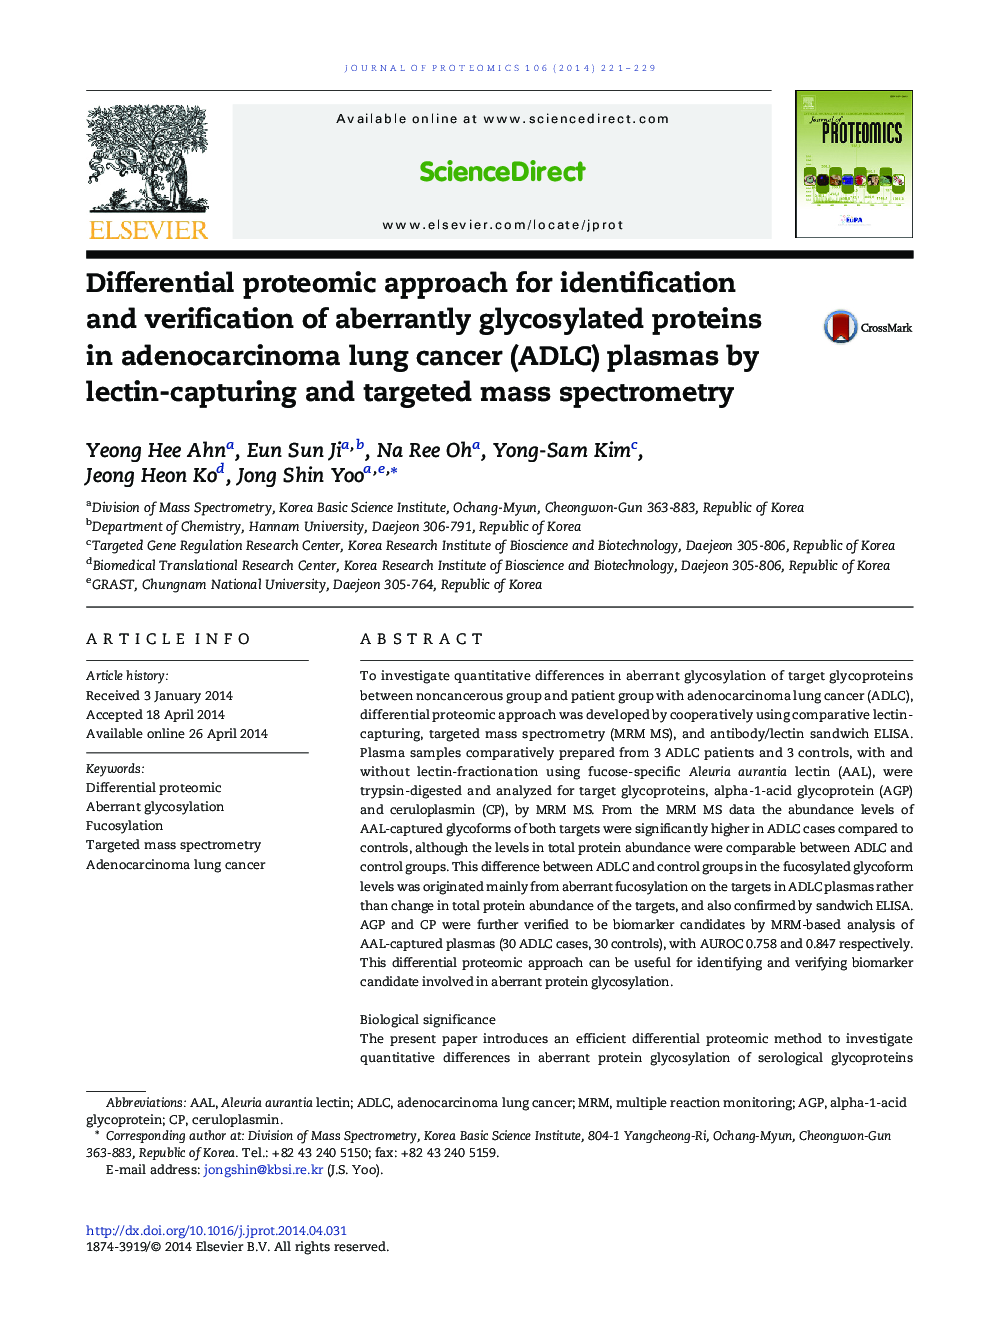 Differential proteomic approach for identification and verification of aberrantly glycosylated proteins in adenocarcinoma lung cancer (ADLC) plasmas by lectin-capturing and targeted mass spectrometry